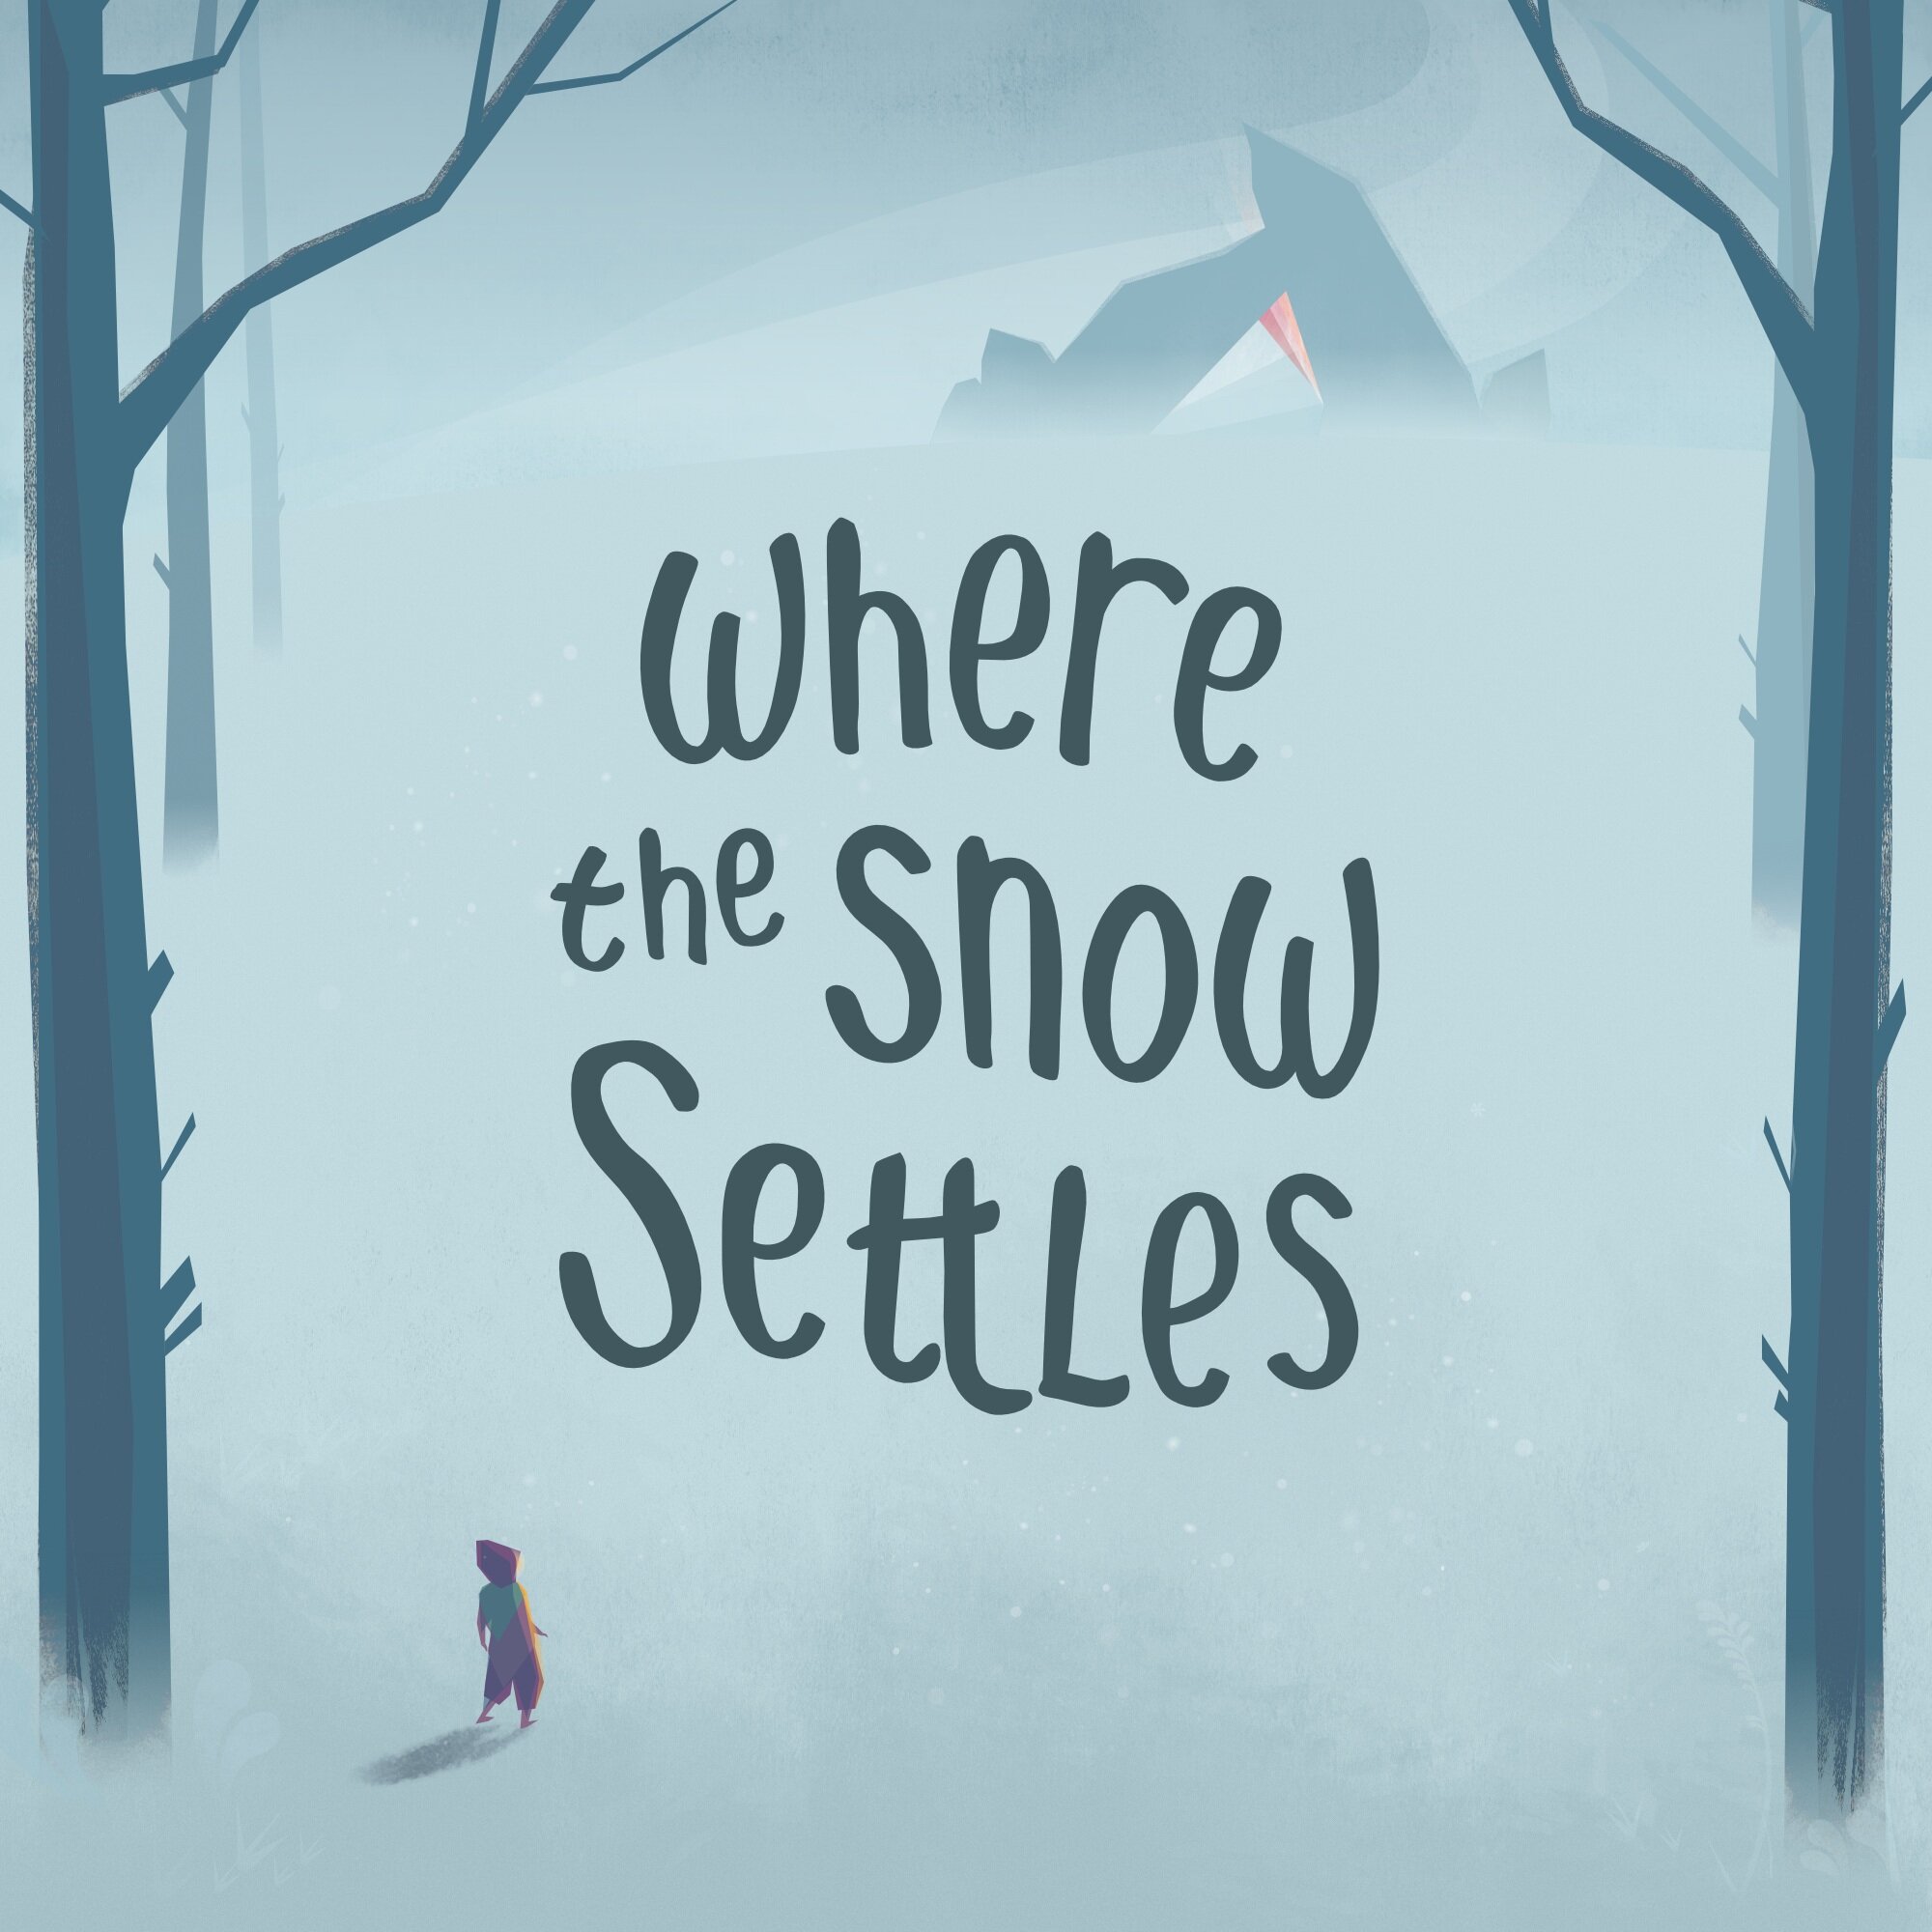 Where the Snow Settles by Myriad Games Studio